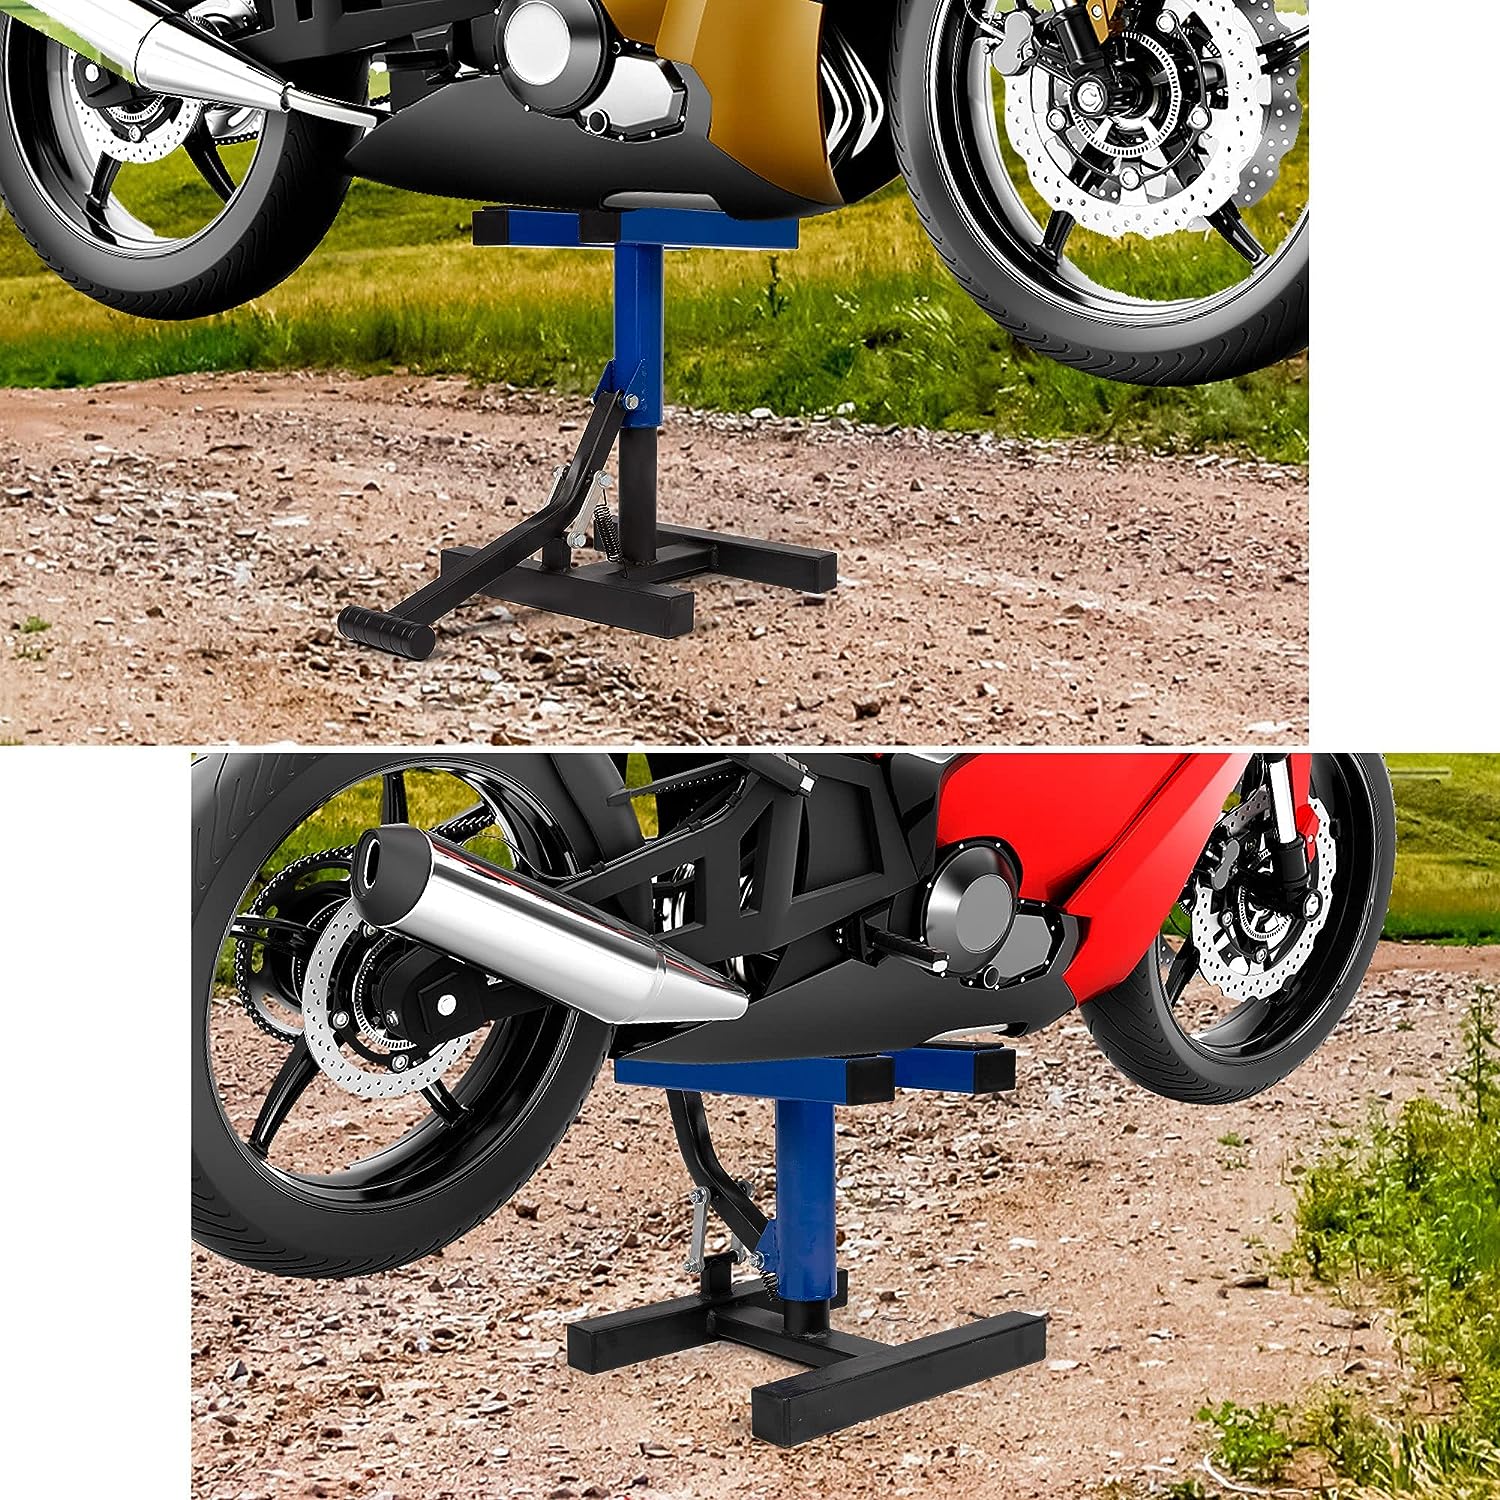 Height Adjustable Lifting Stand Motorcycle Dirt Bike Lift Repair Stand